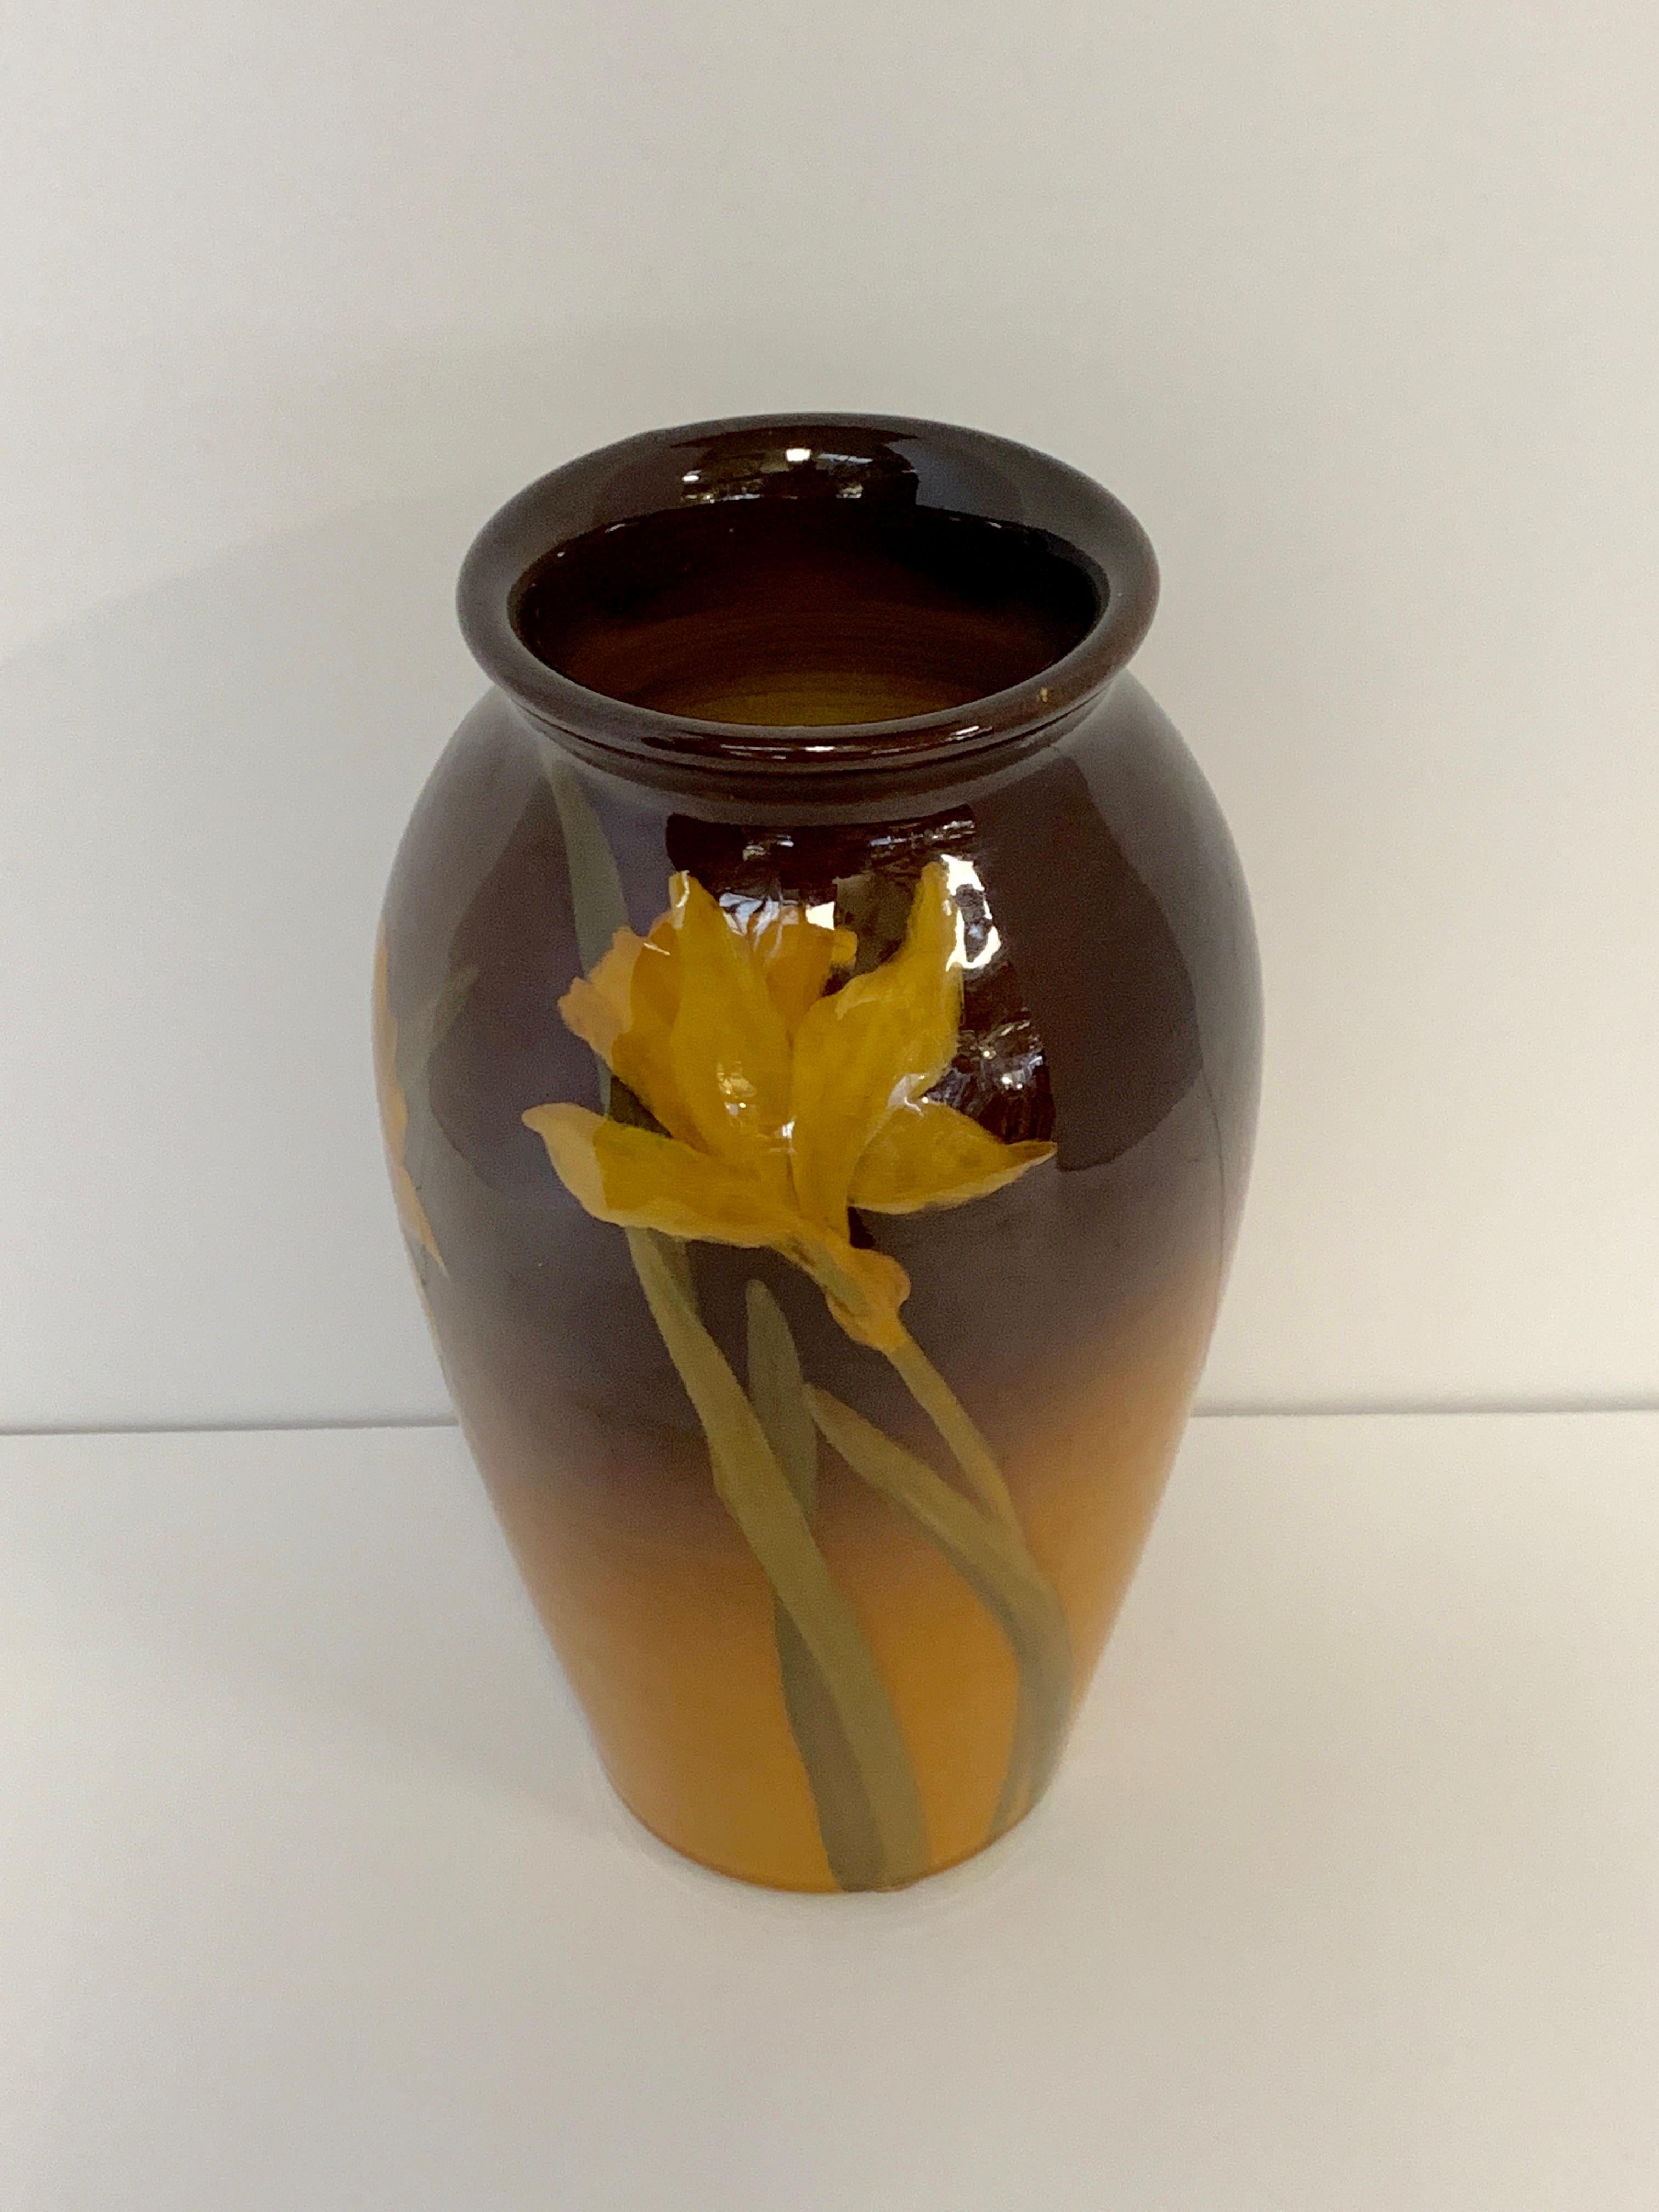 A beautiful early 20th century vase decorated by Clara Lindeman. it is marked on the base with her initial C.C.l. and the Rookwood logo. It also features a sticker with a retailer name Davis Collamore & Co. from NYC. The vase appears in good age